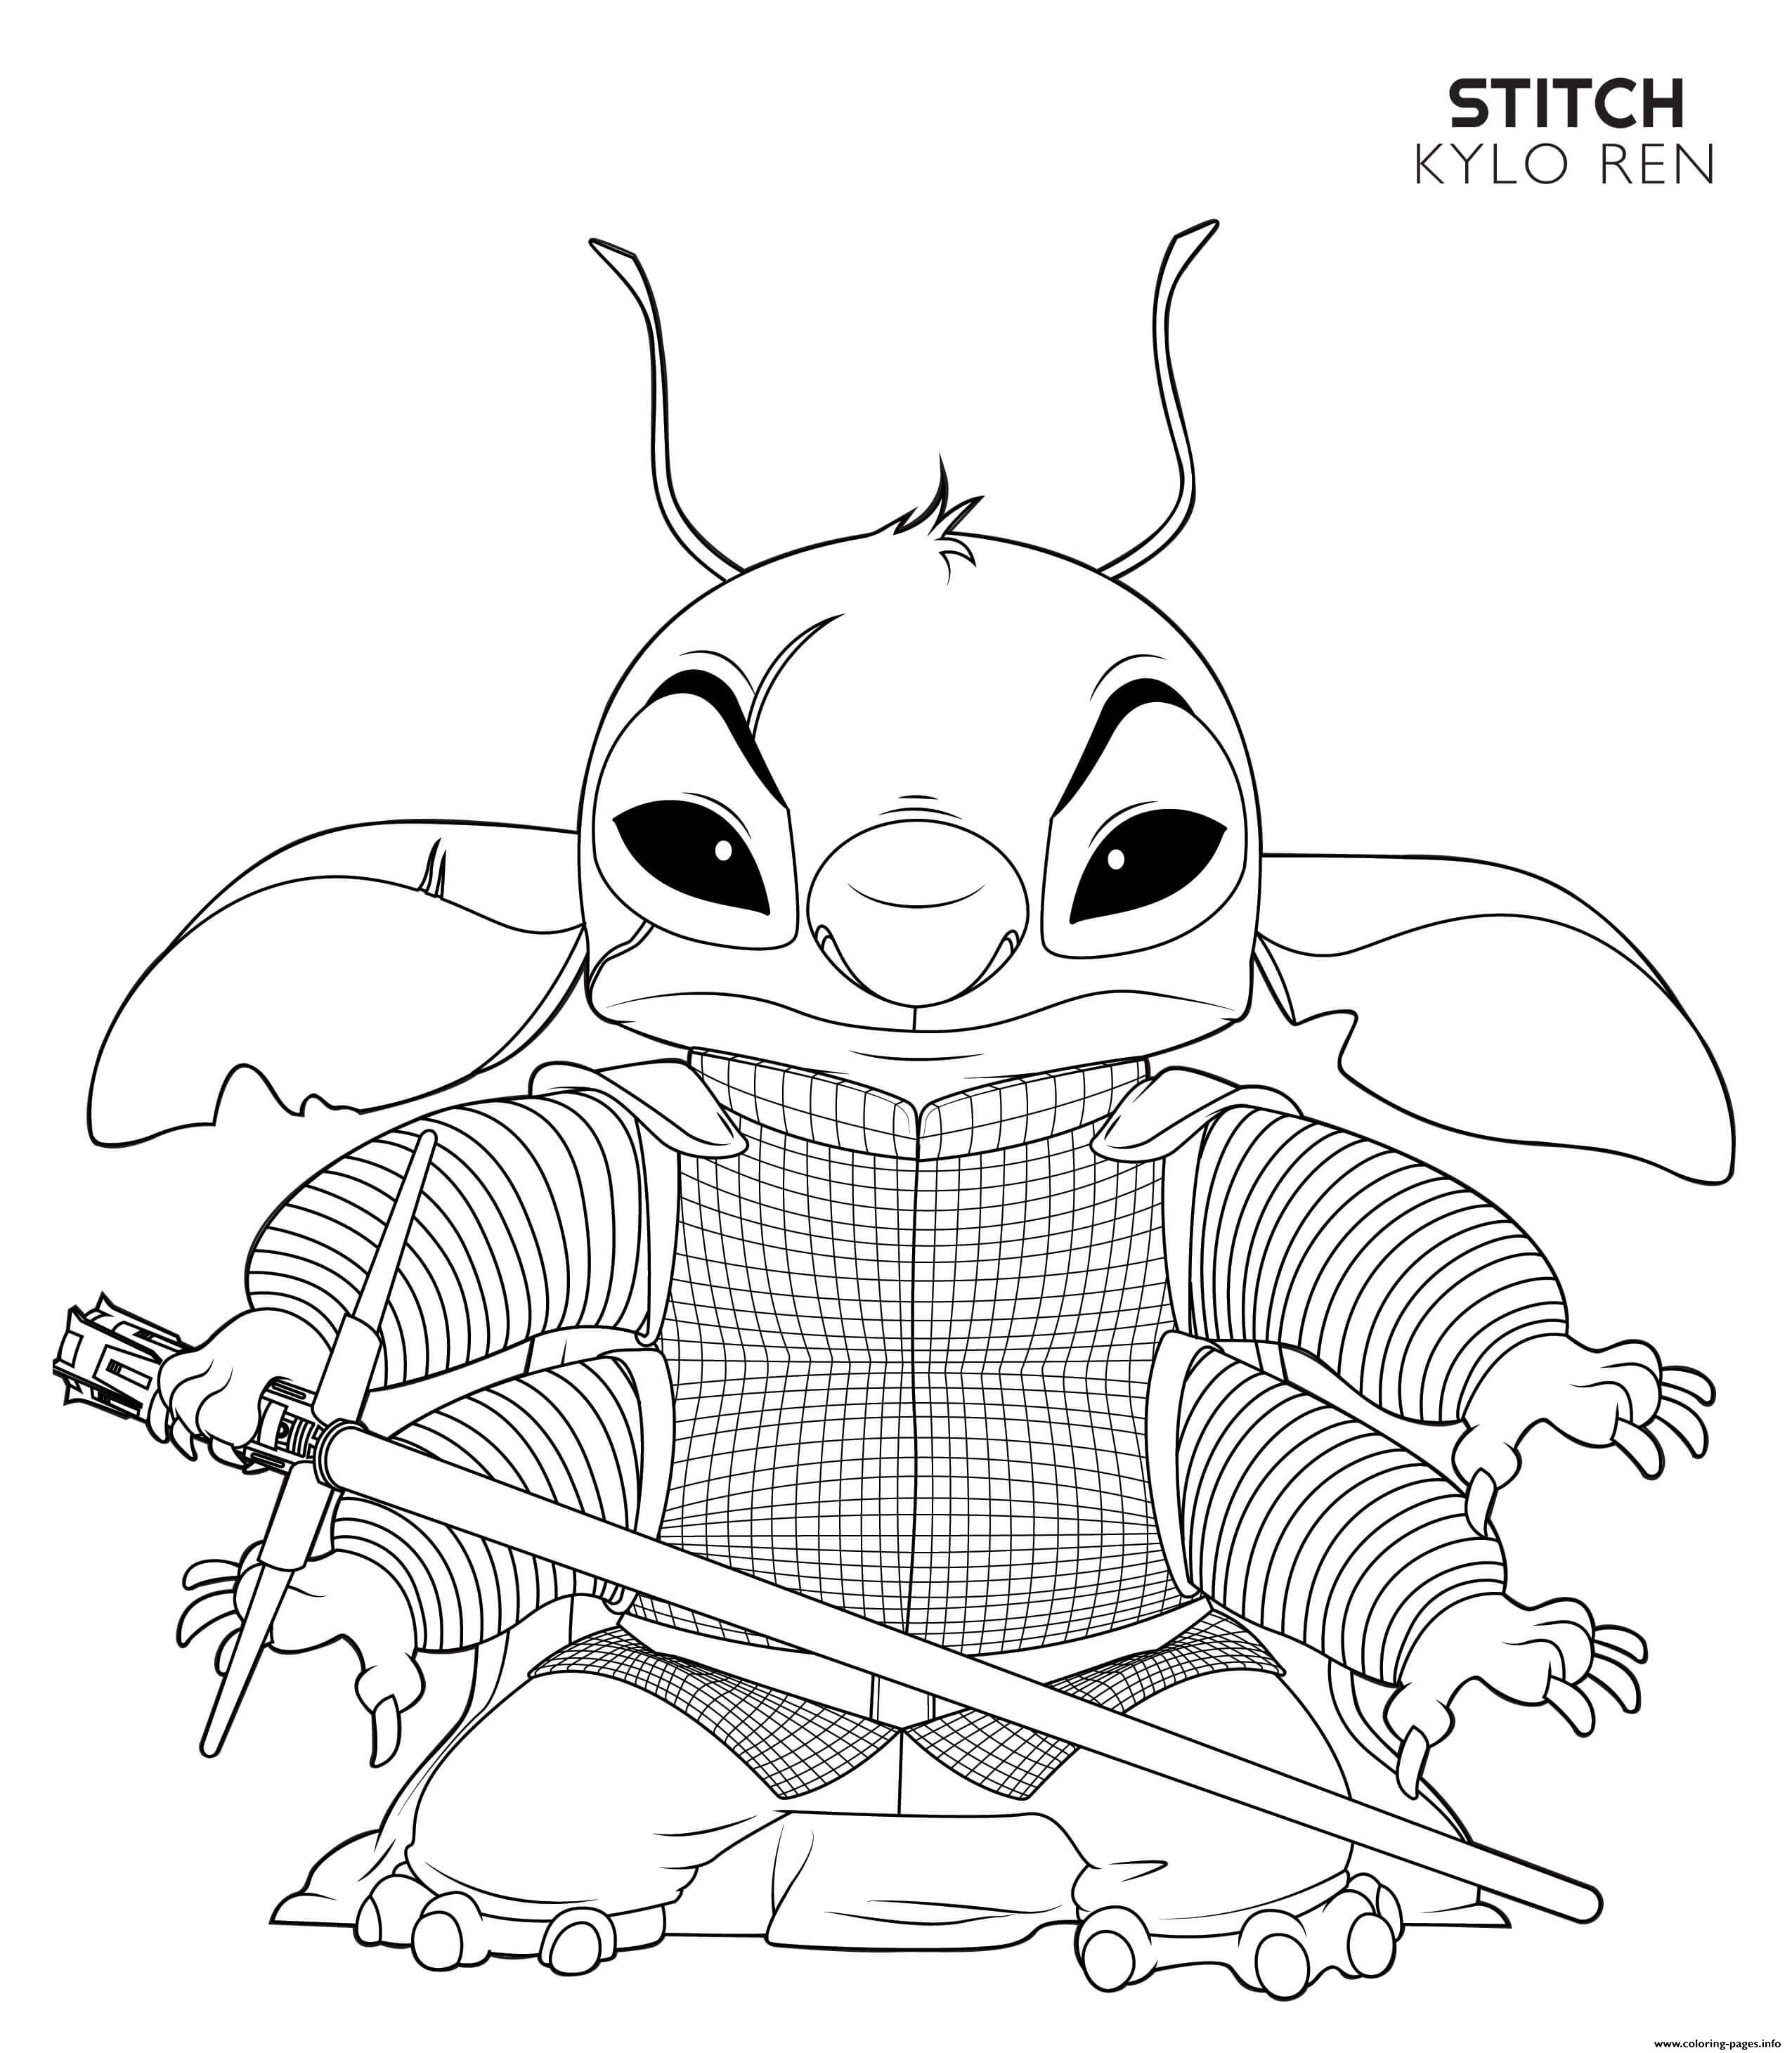 Kylo Ren Stitch Disney Star Wars Coloring Pages Printable